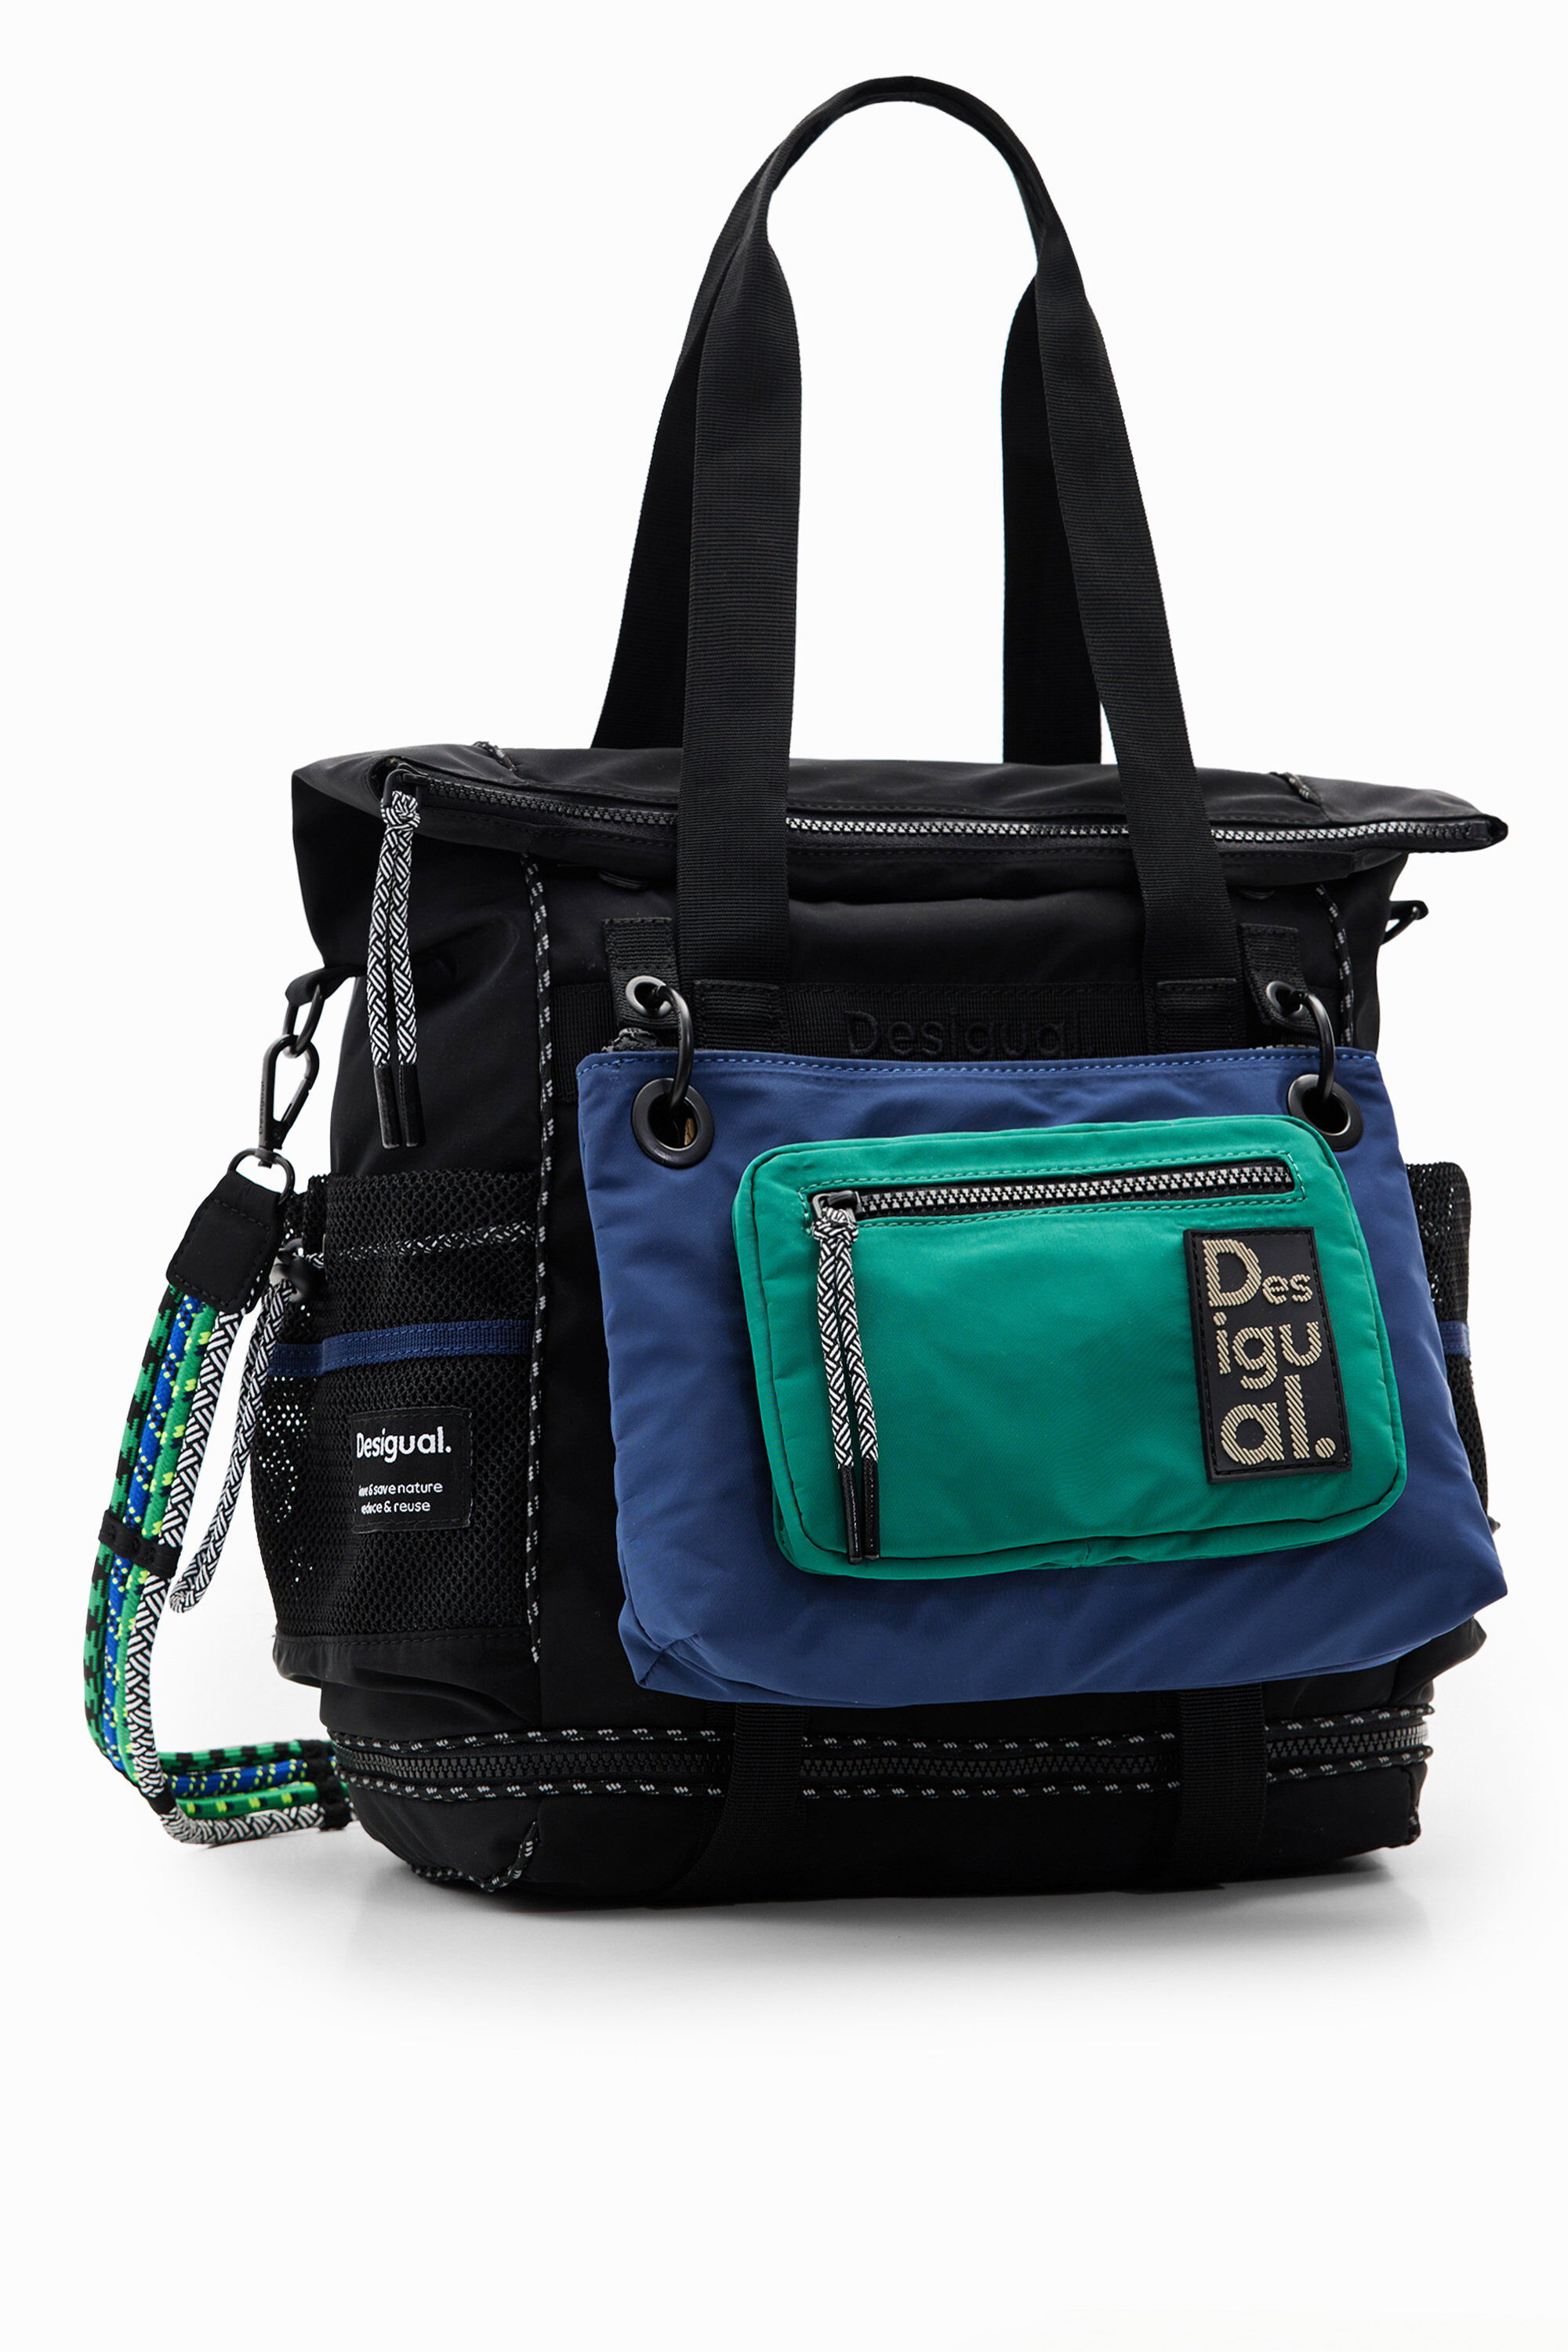 Desigual XL multi-position backpack